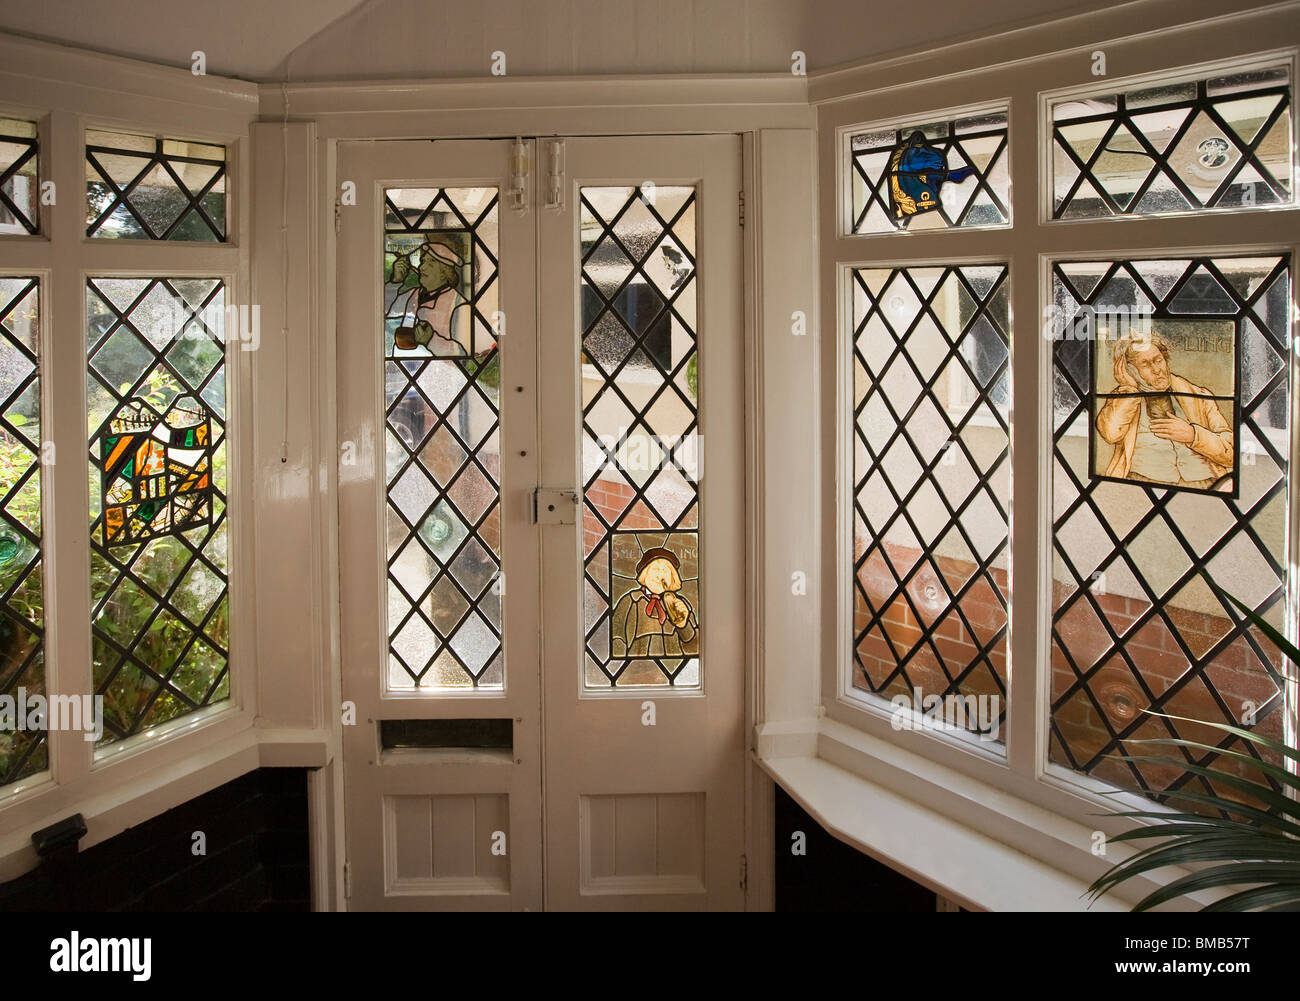 Houses Edwardian arts and crafts House, decorative stained glass decorating entrance porch Stock Photo